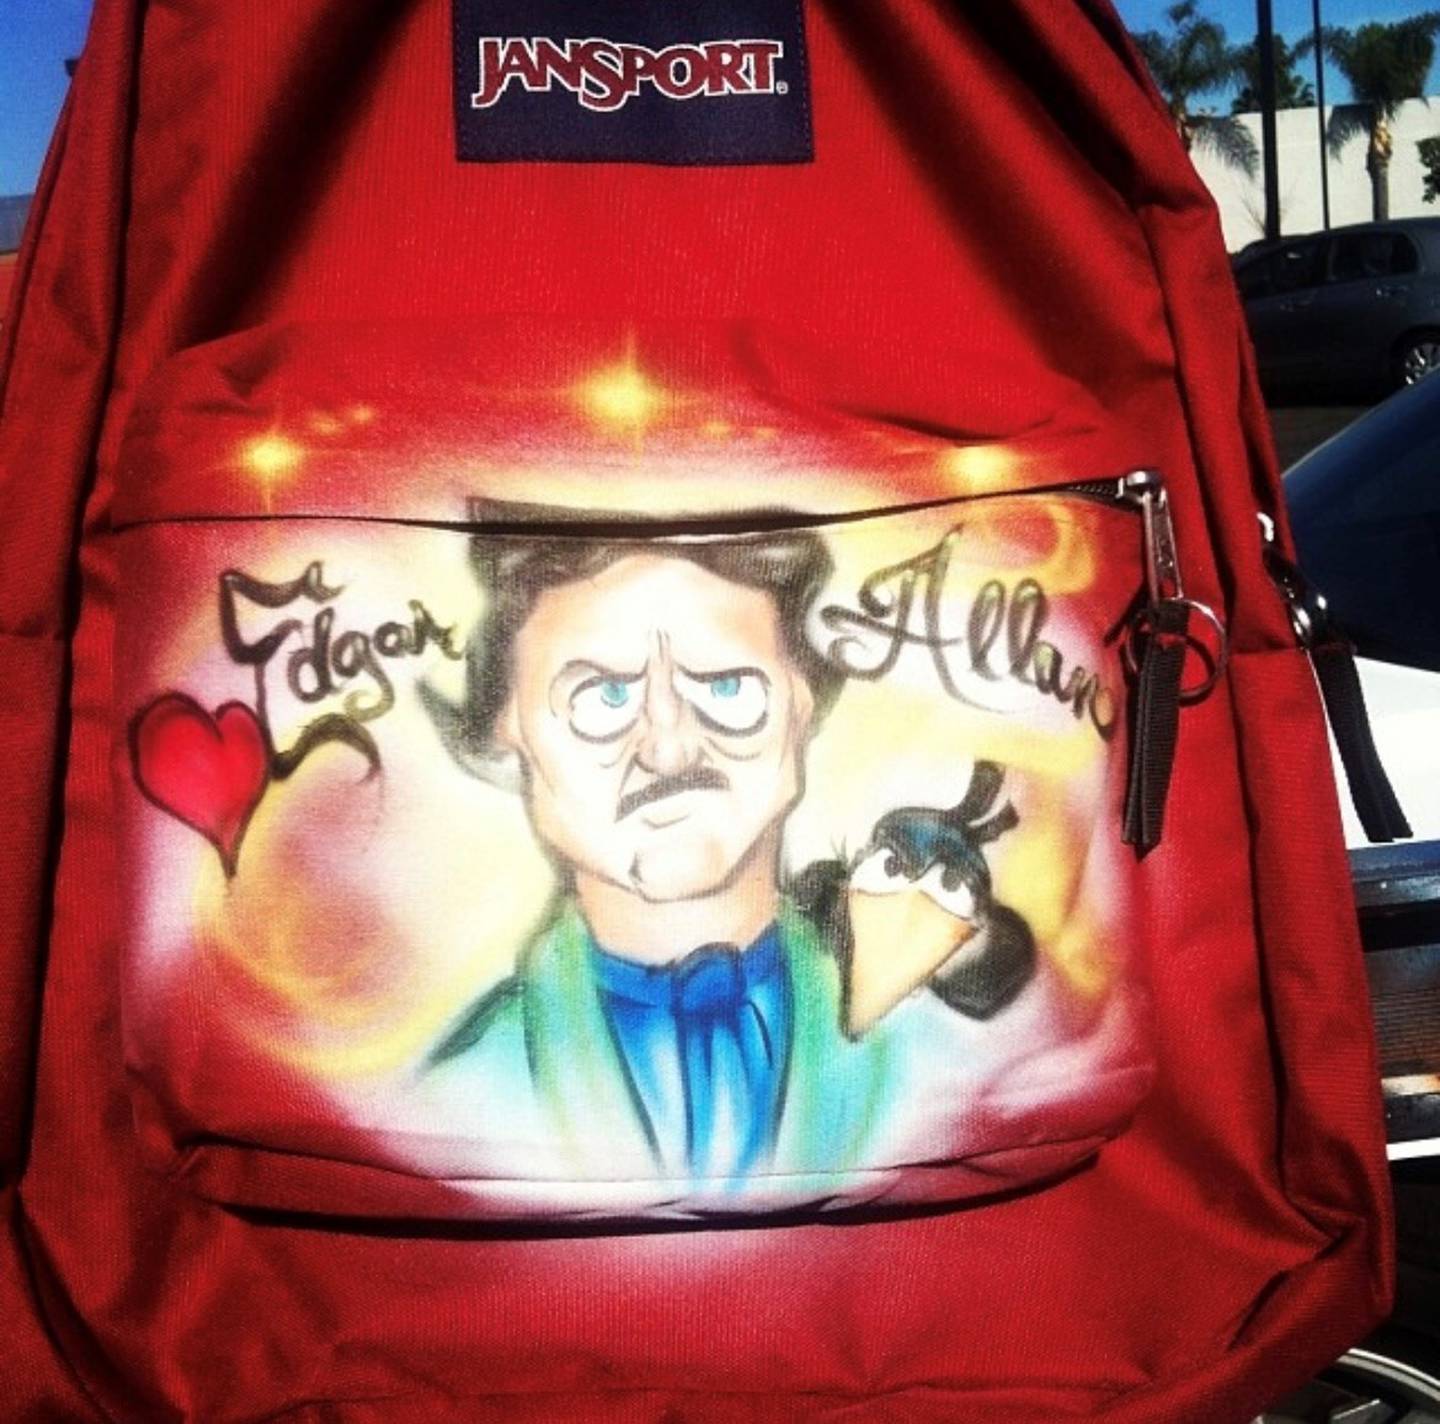 After connecting with an artist online, reporter Jasmine Vaughn-Hall drove to Long Beach, California to get Edgar Allan Poe airbrushed onto her Jansport backpack.